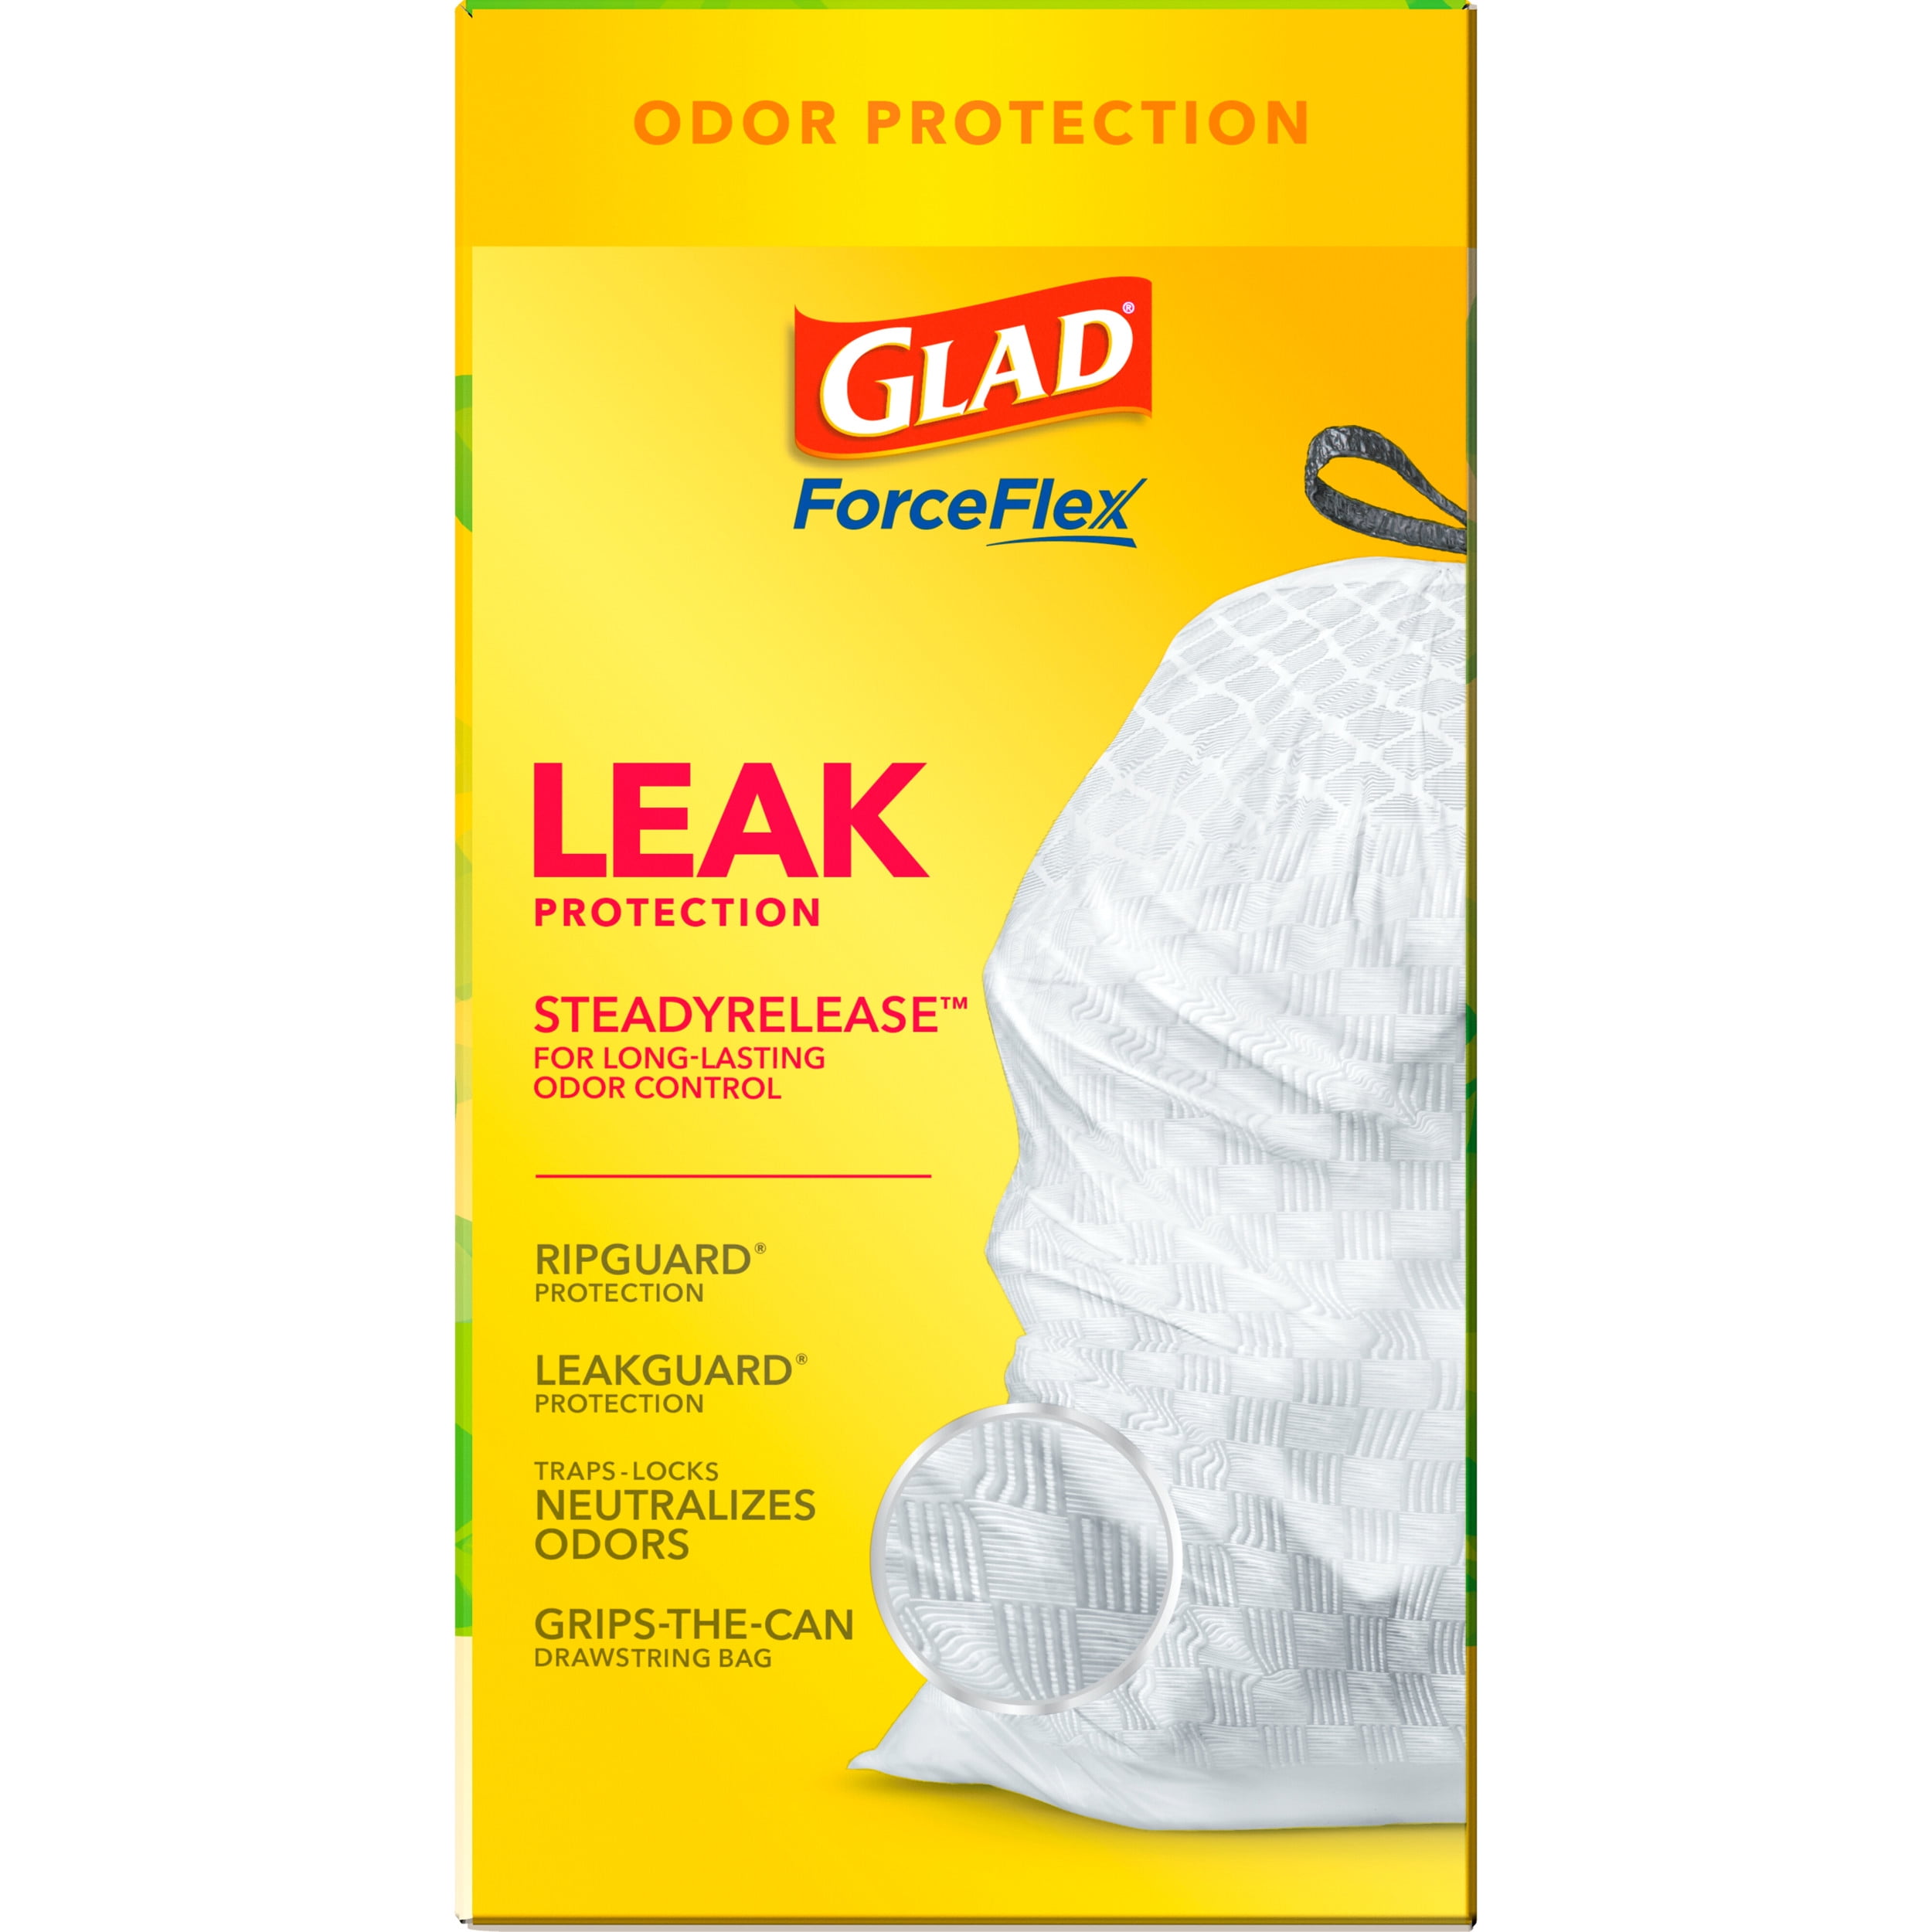 GLAD CAN LINER 13 GAL KITCHEN DRAWSTRING BAGS FLEX - US Foods CHEF'STORE